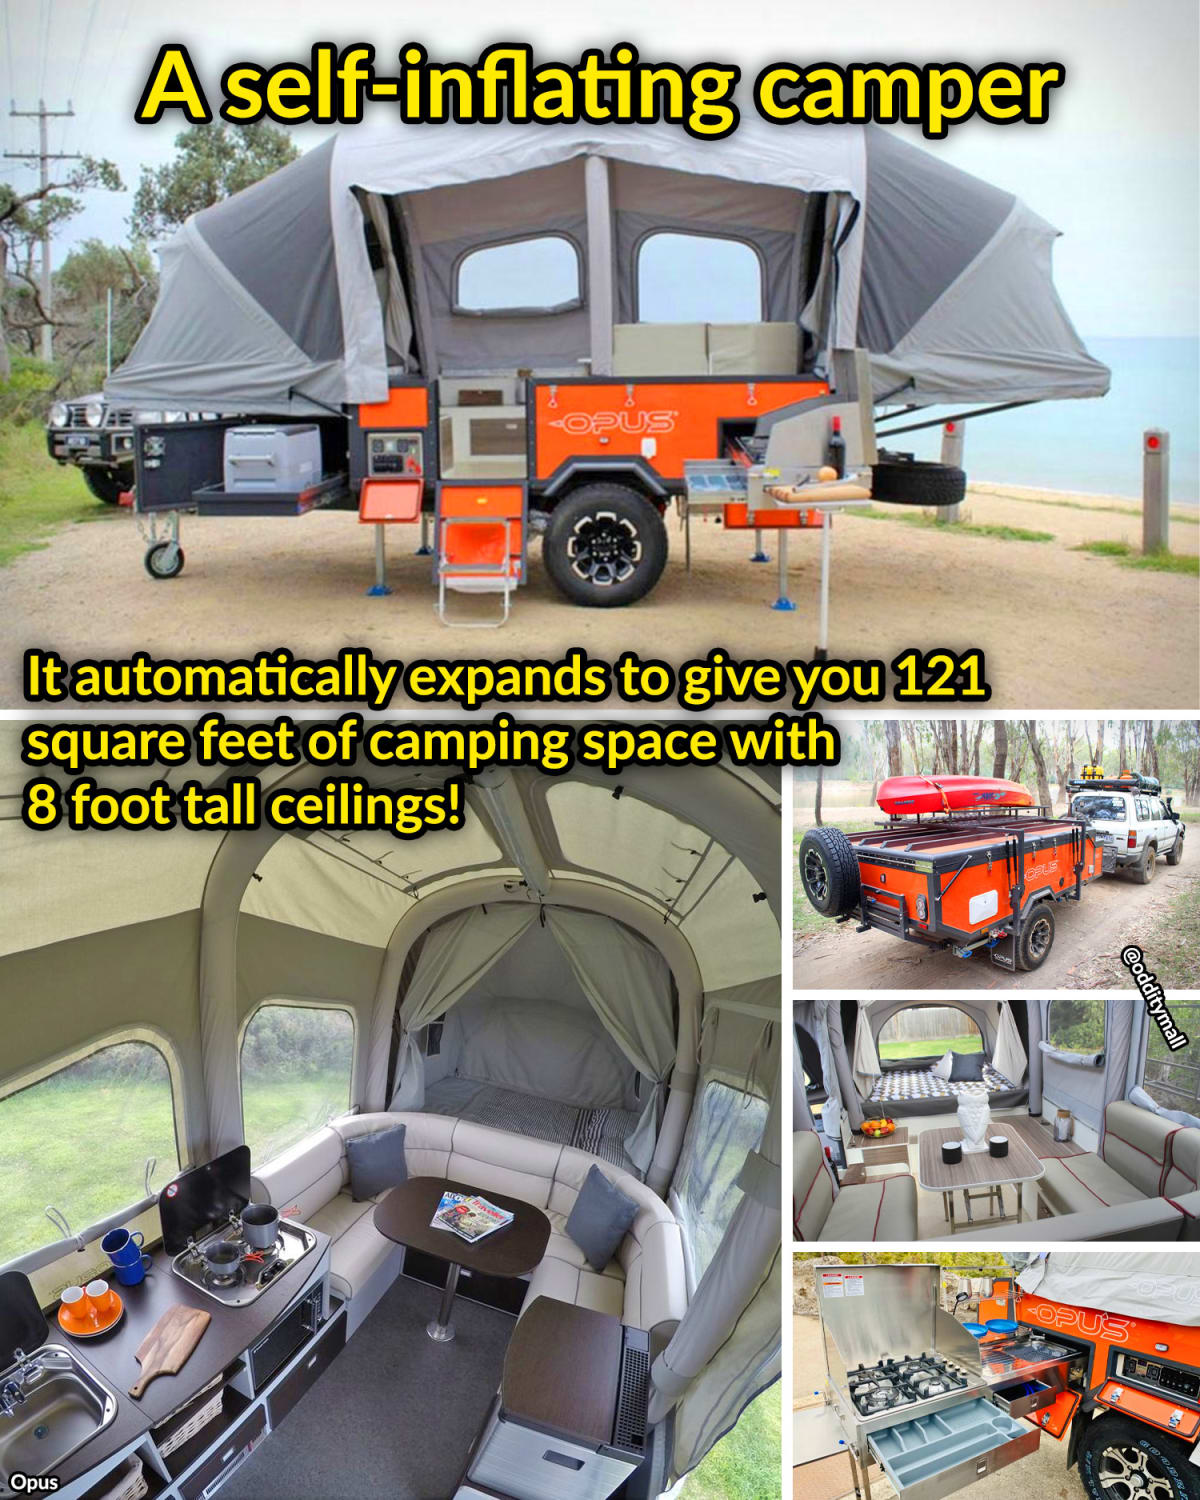 Automatic Camper Sets Itself Up In 90 Seconds